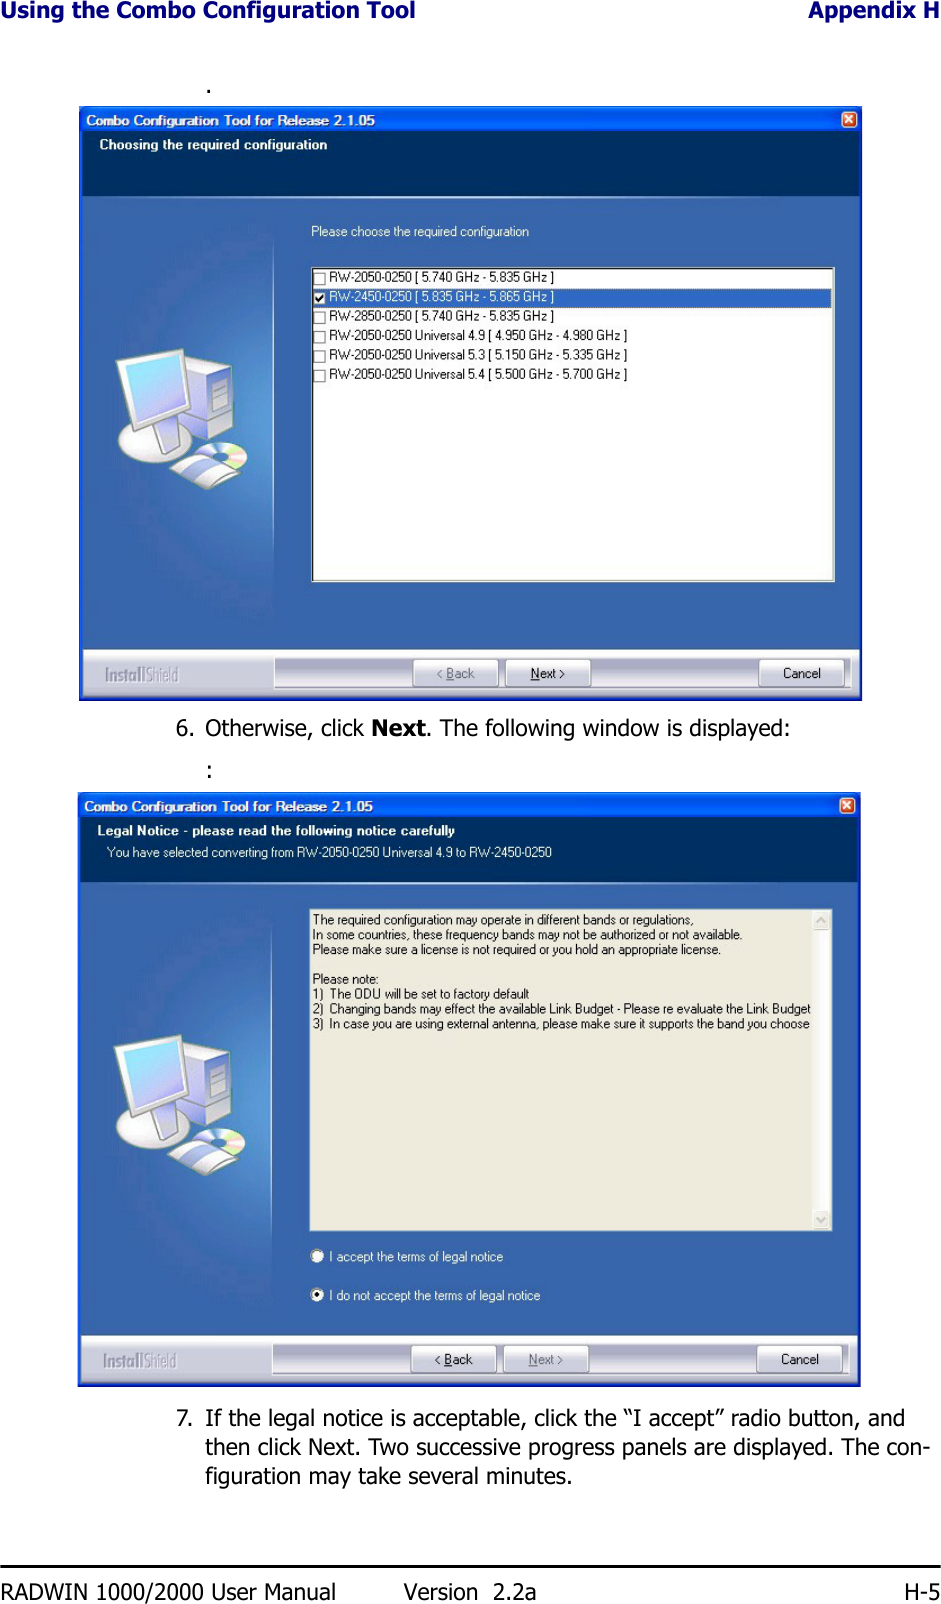 Using the Combo Configuration Tool Appendix HRADWIN 1000/2000 User Manual Version  2.2a H-5.6. Otherwise, click Next. The following window is displayed::7. If the legal notice is acceptable, click the “I accept” radio button, and then click Next. Two successive progress panels are displayed. The con-figuration may take several minutes.